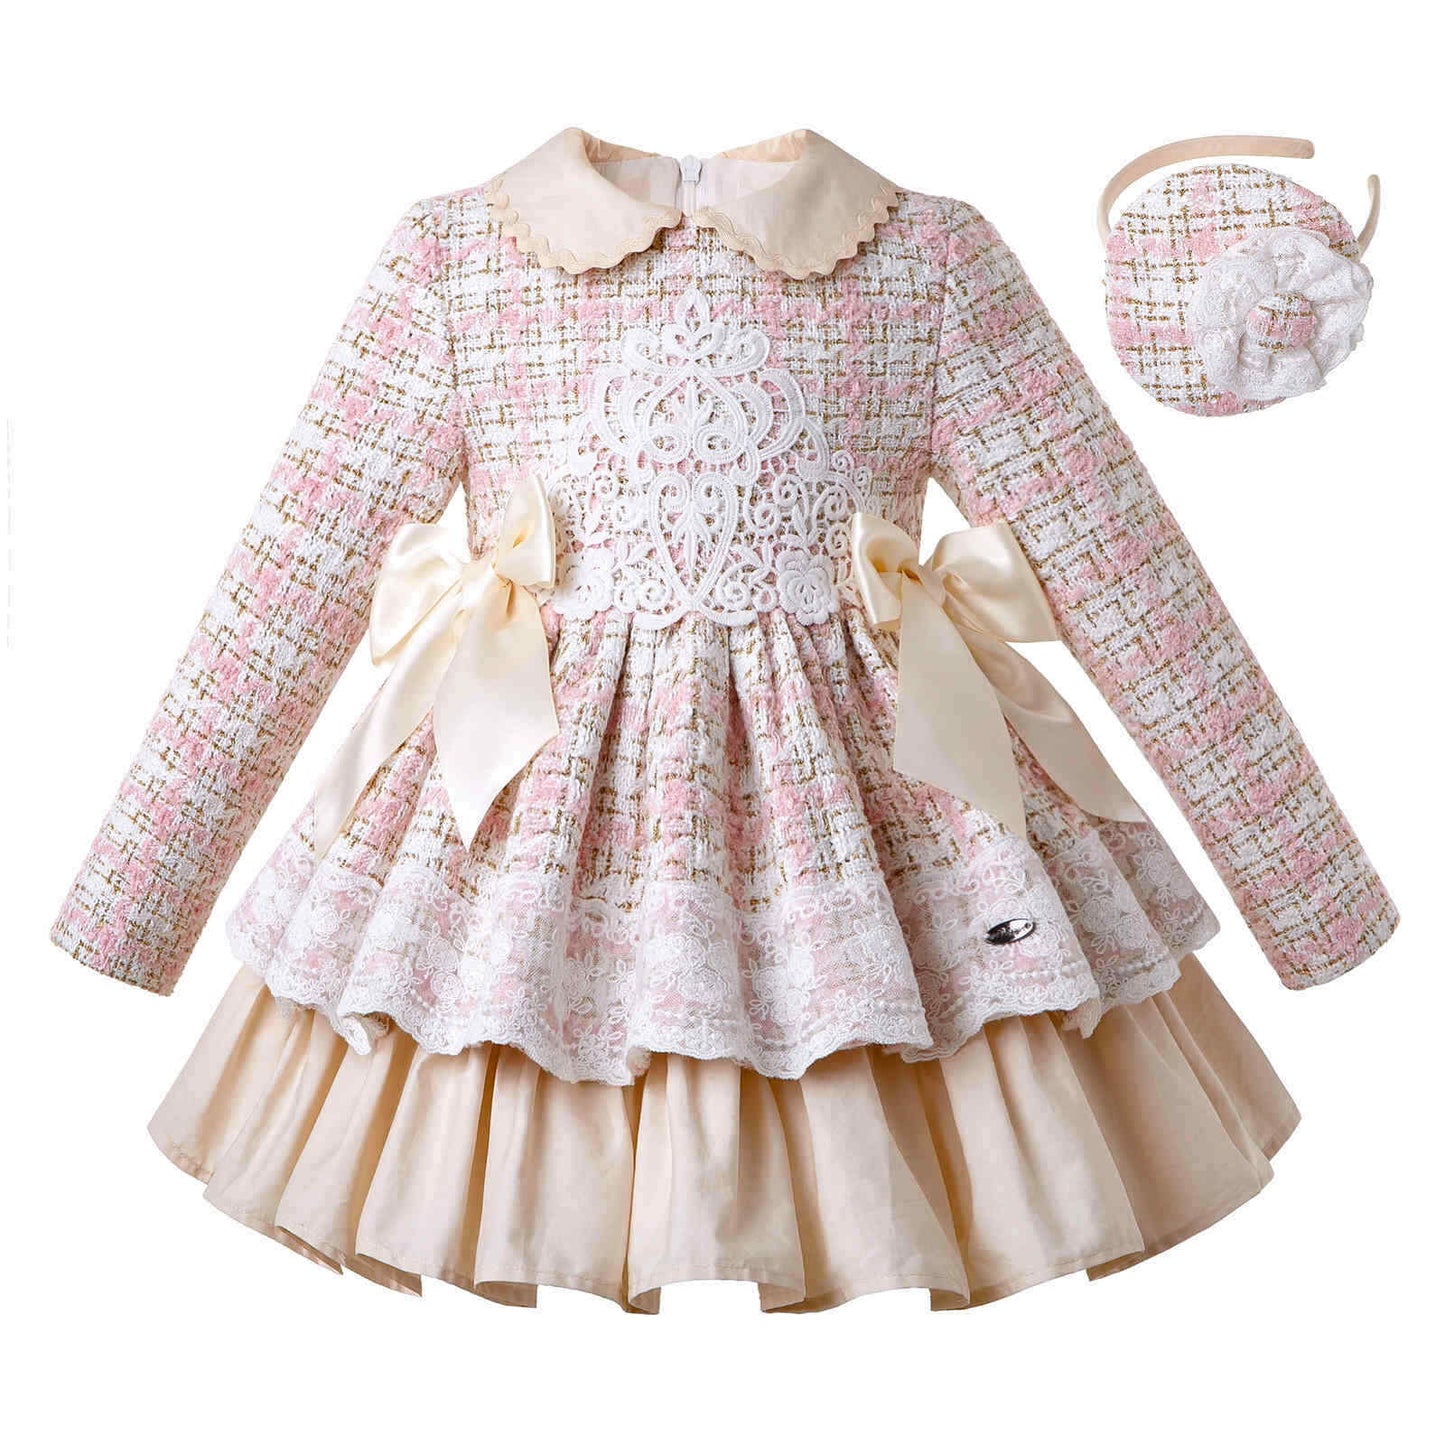 (Authentic Pettigirl) Vintage Girls Lace Dress Tweed Christmas Clothes Spanish Style